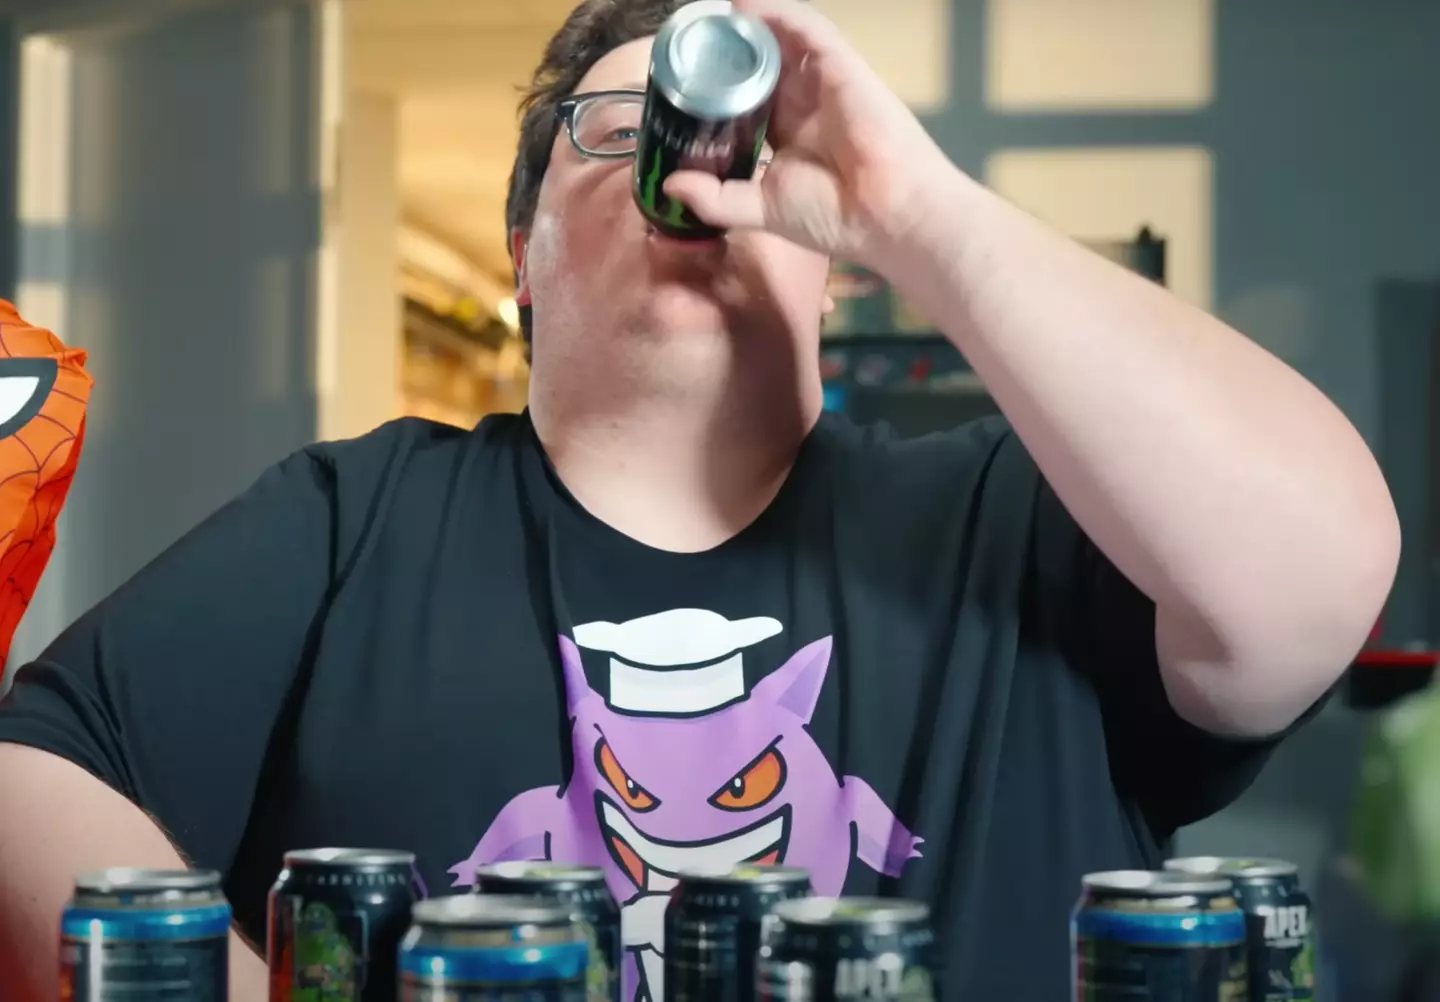 The man drank 12 energy drinks in 10 minutes.